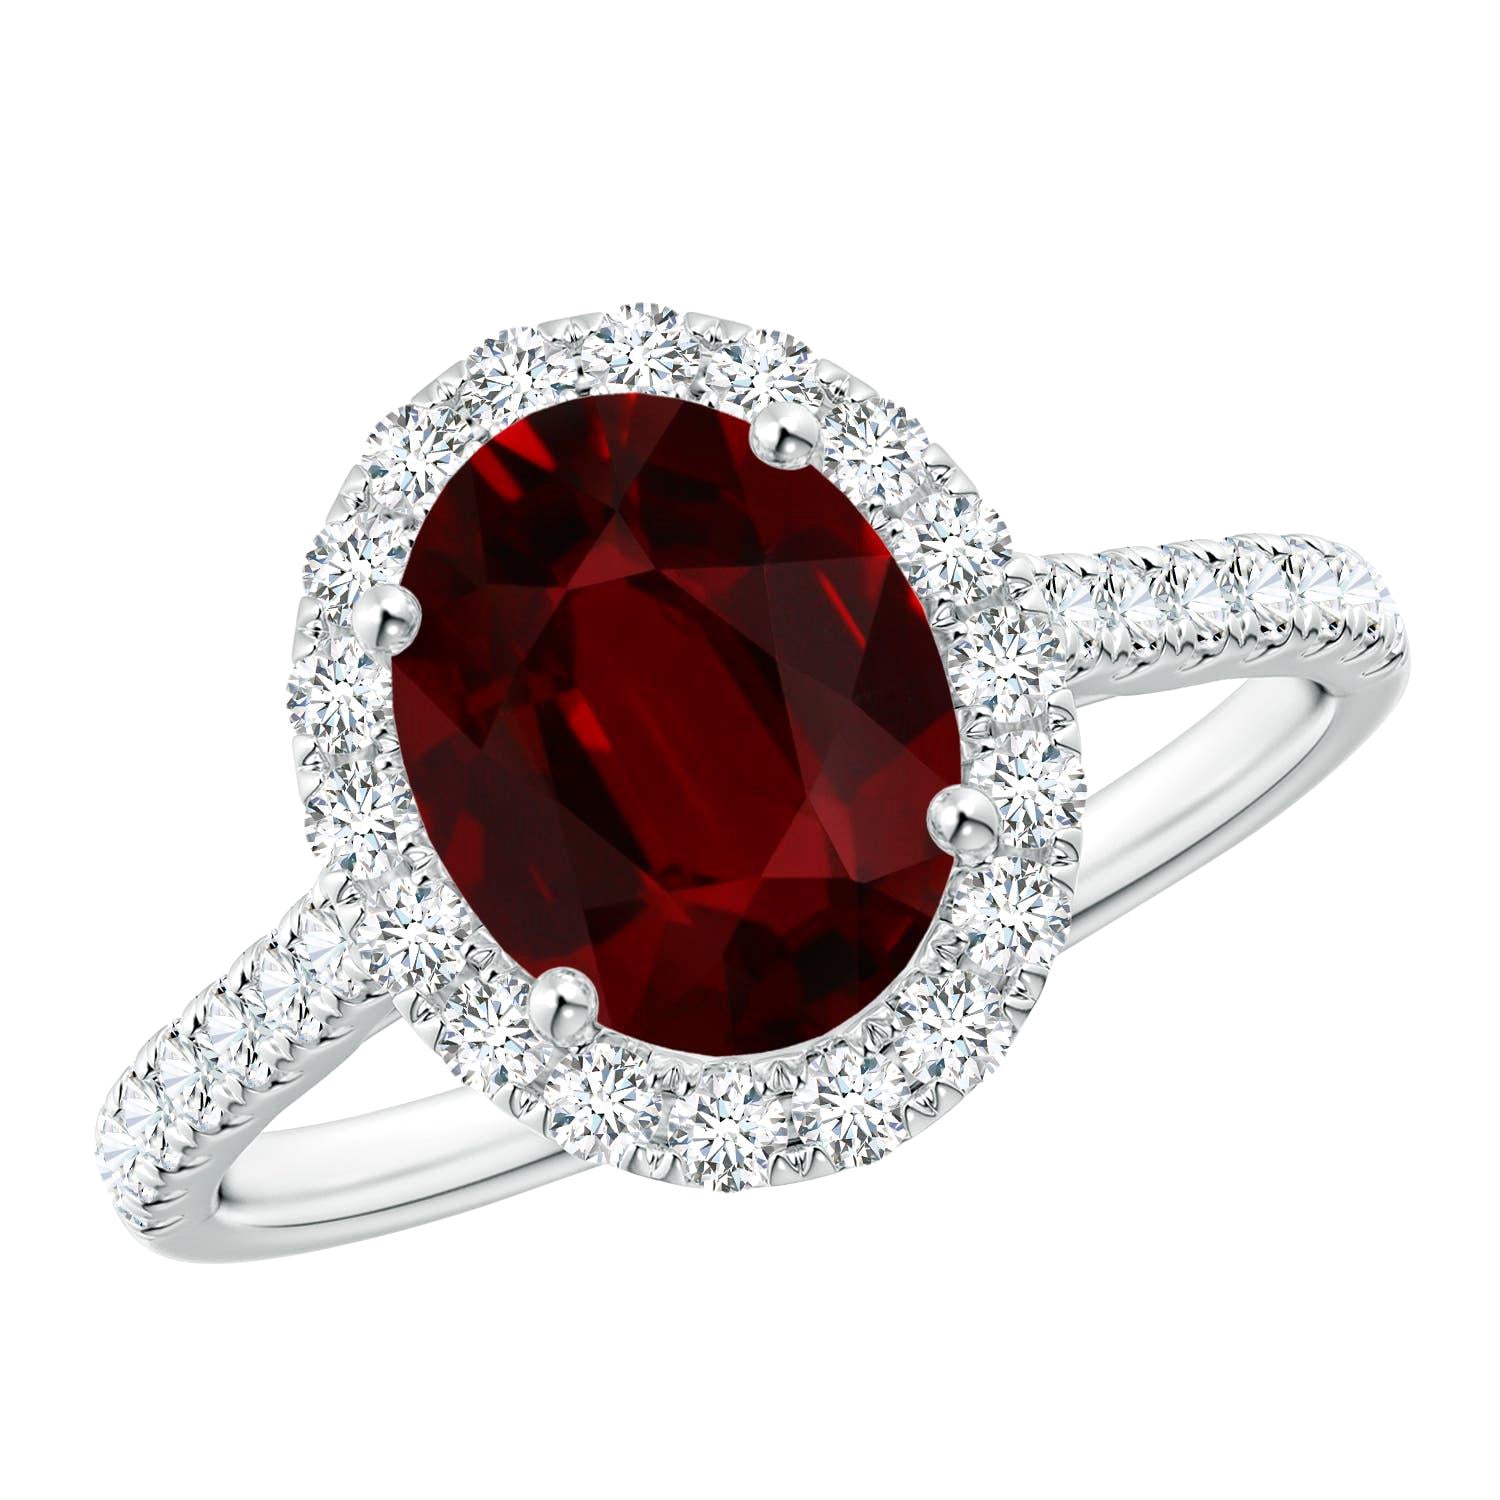 For Sale:  GIA Certified Natural Ruby Halo Ring in Platinum with Diamonds